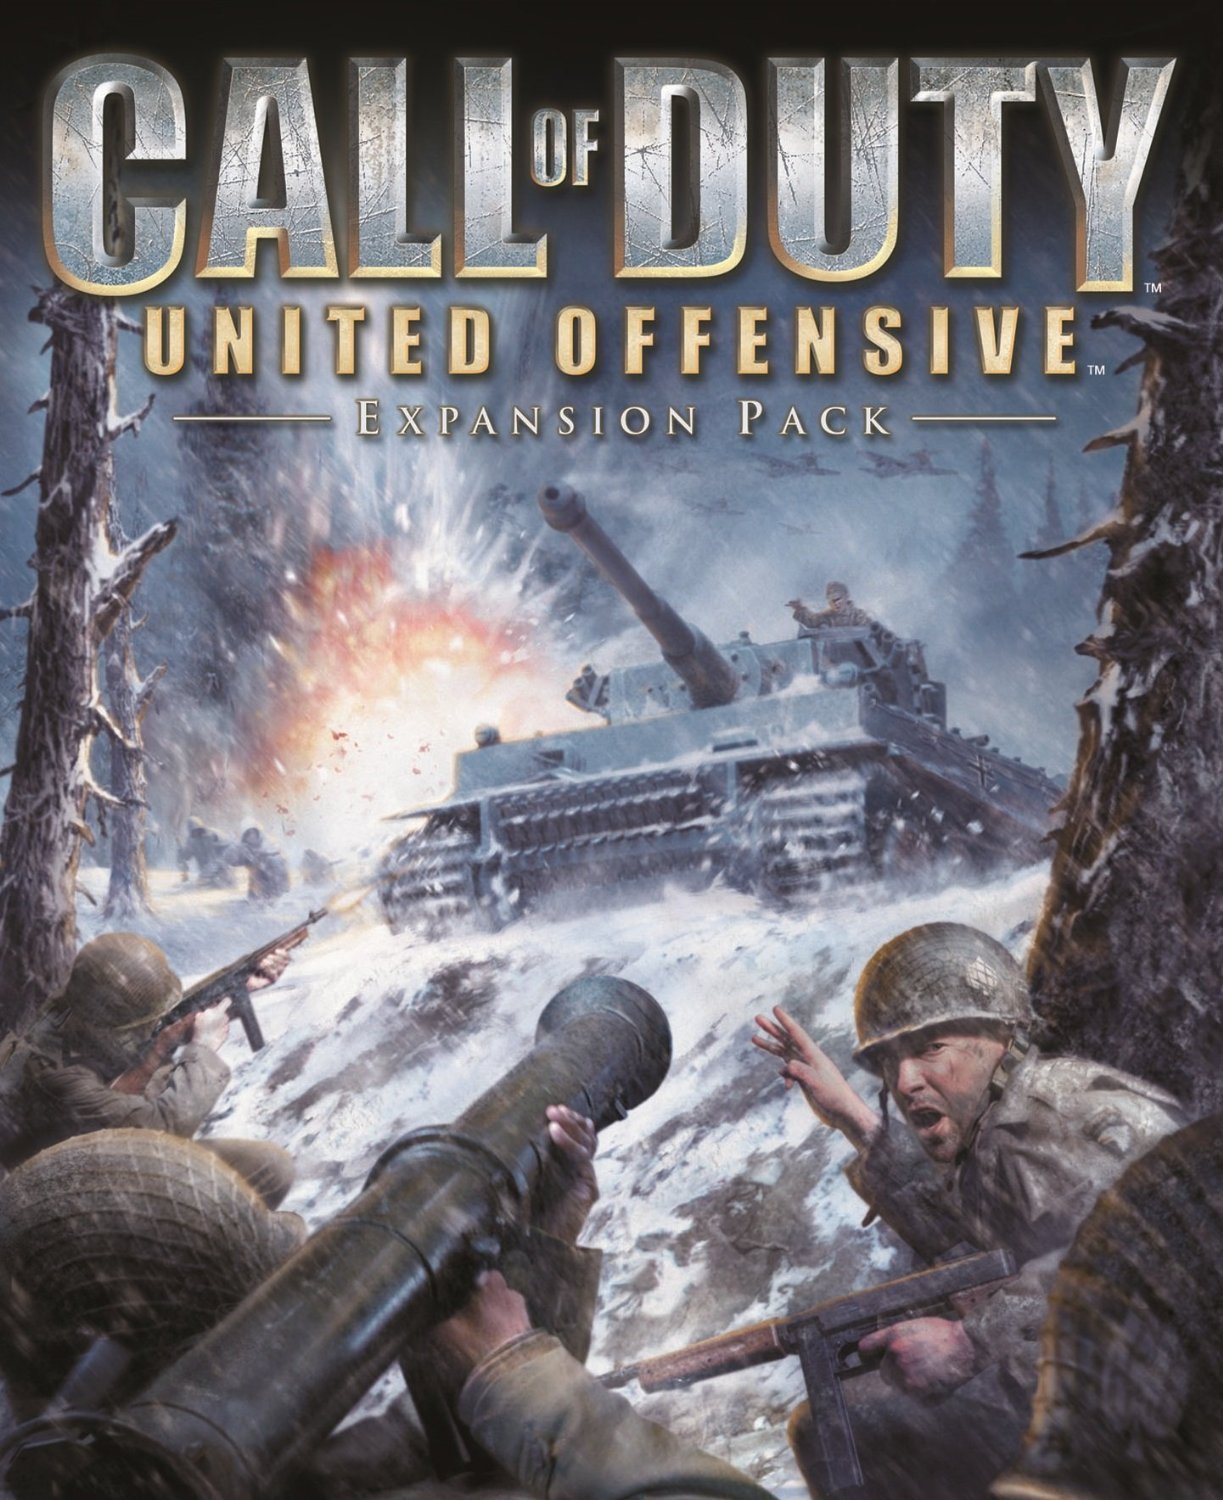 United offensive steam фото 20